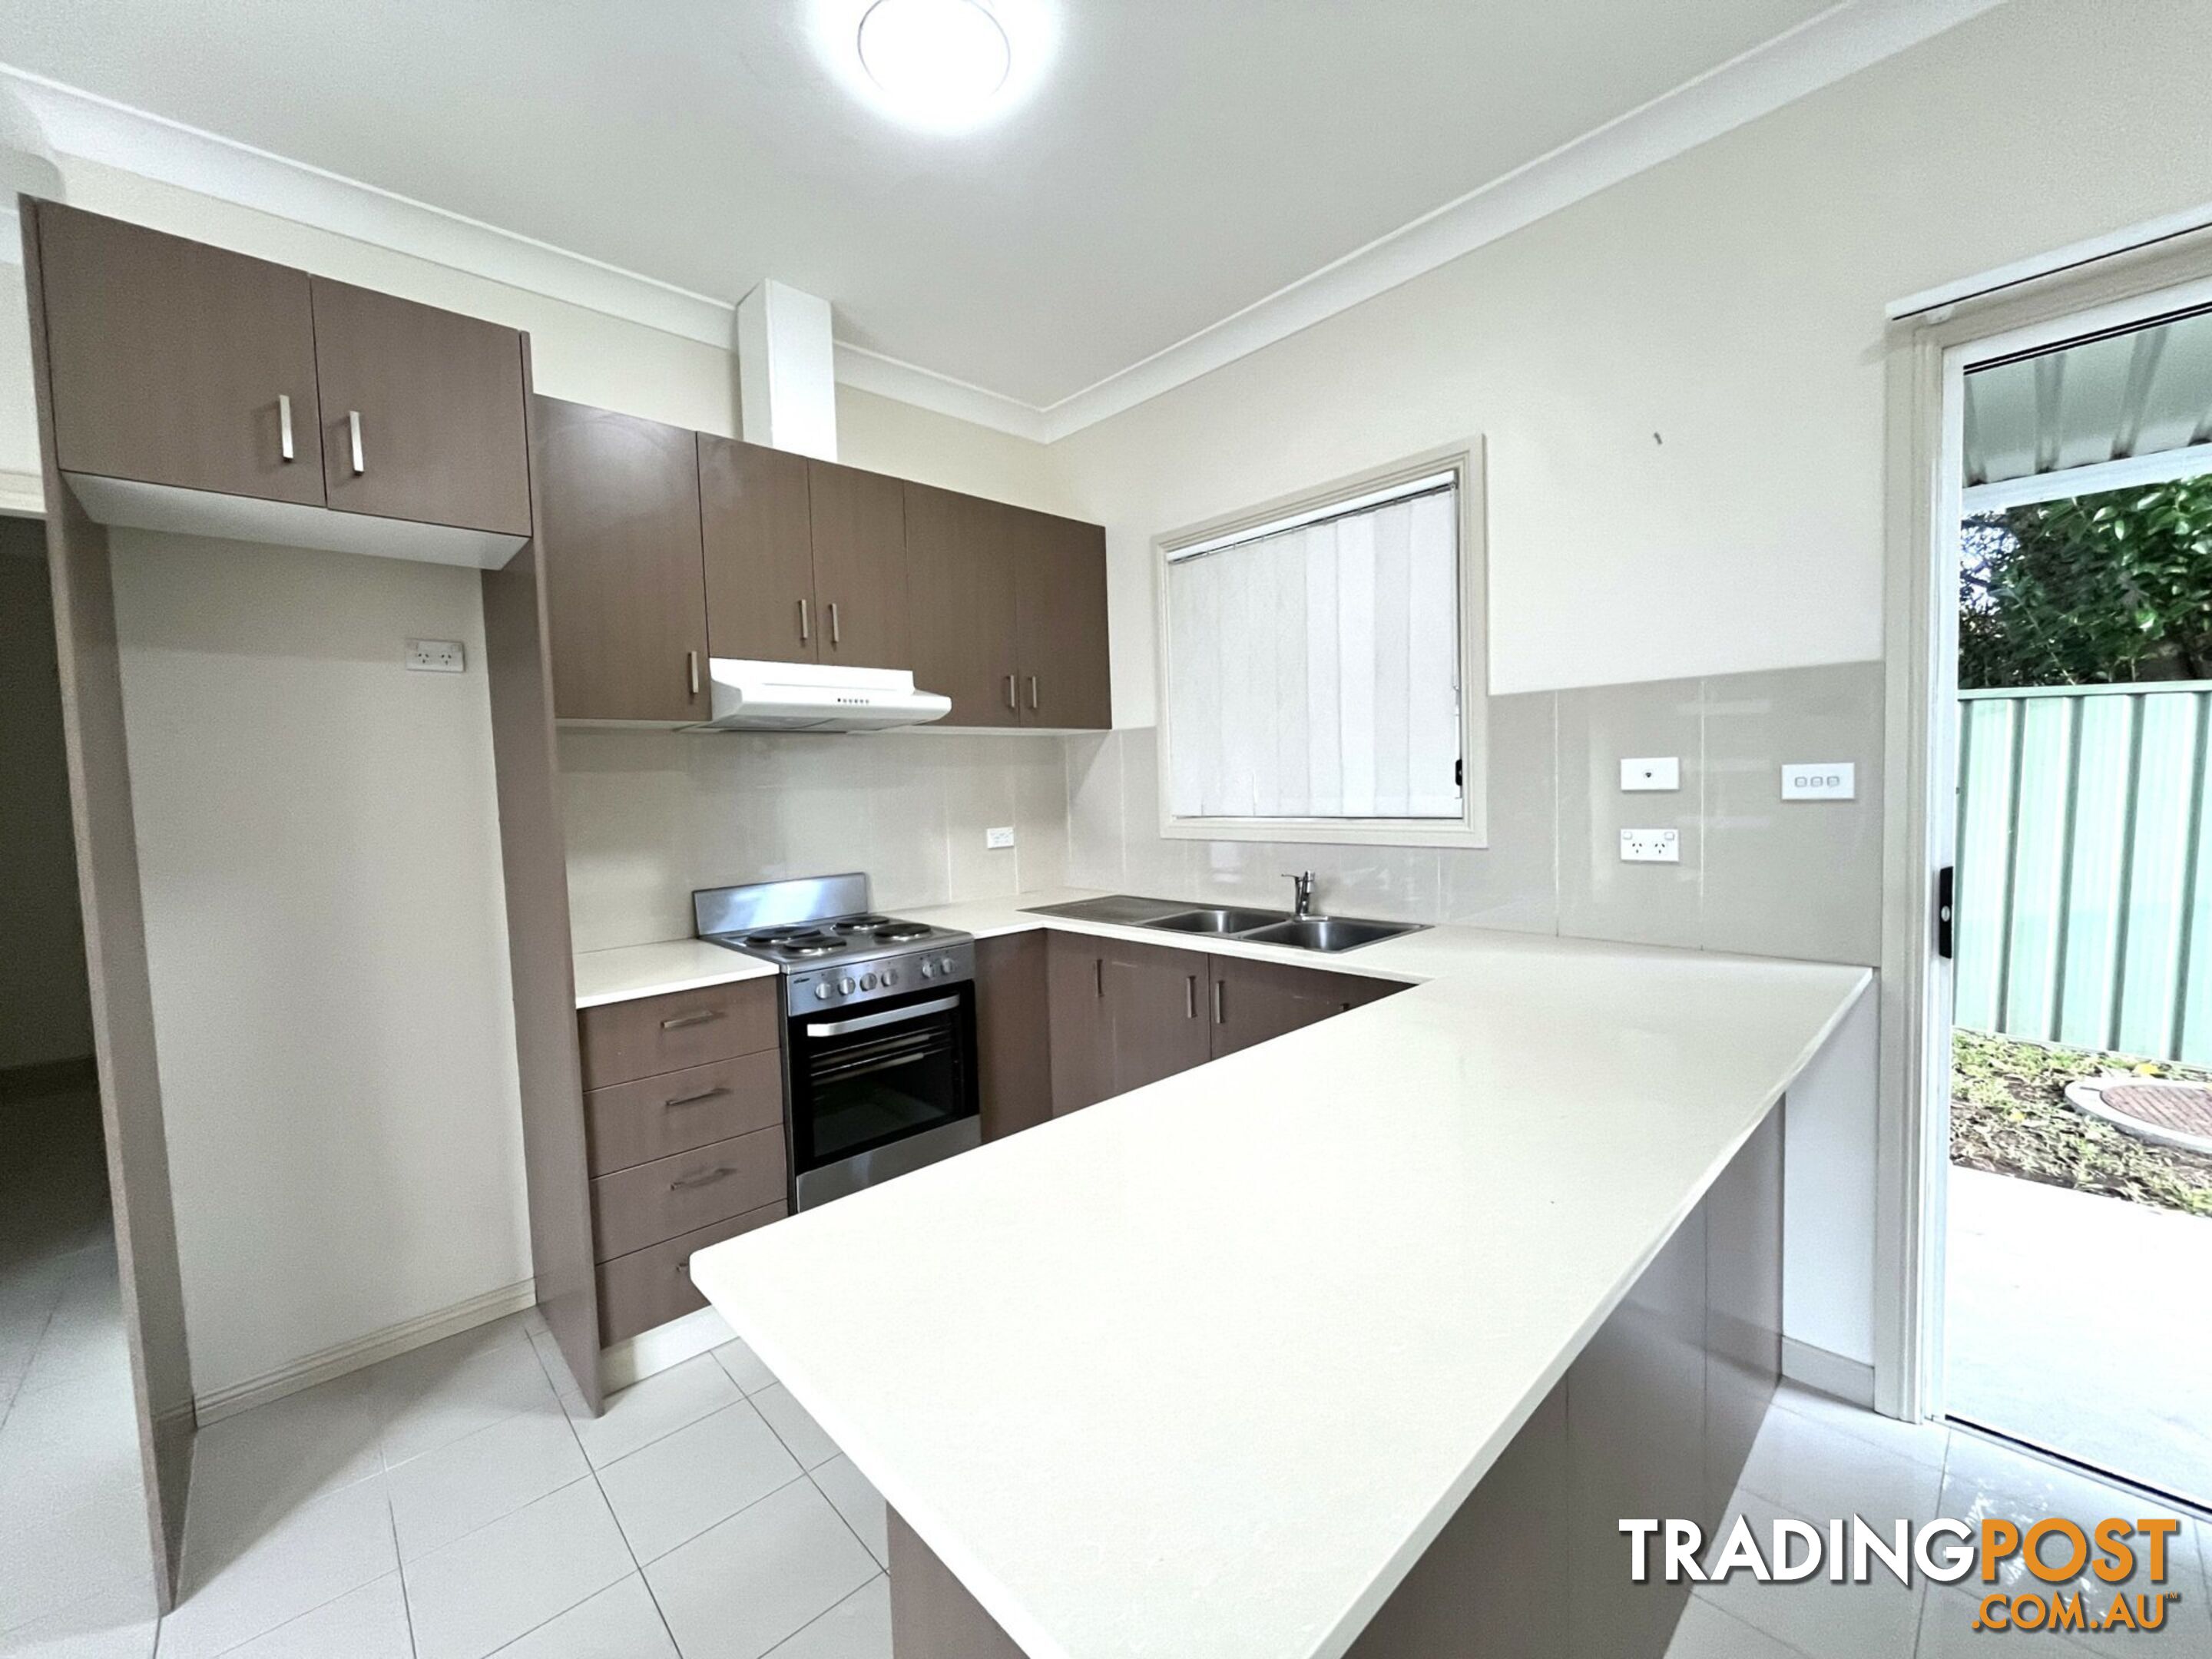 200a Derby St PENRITH NSW 2750